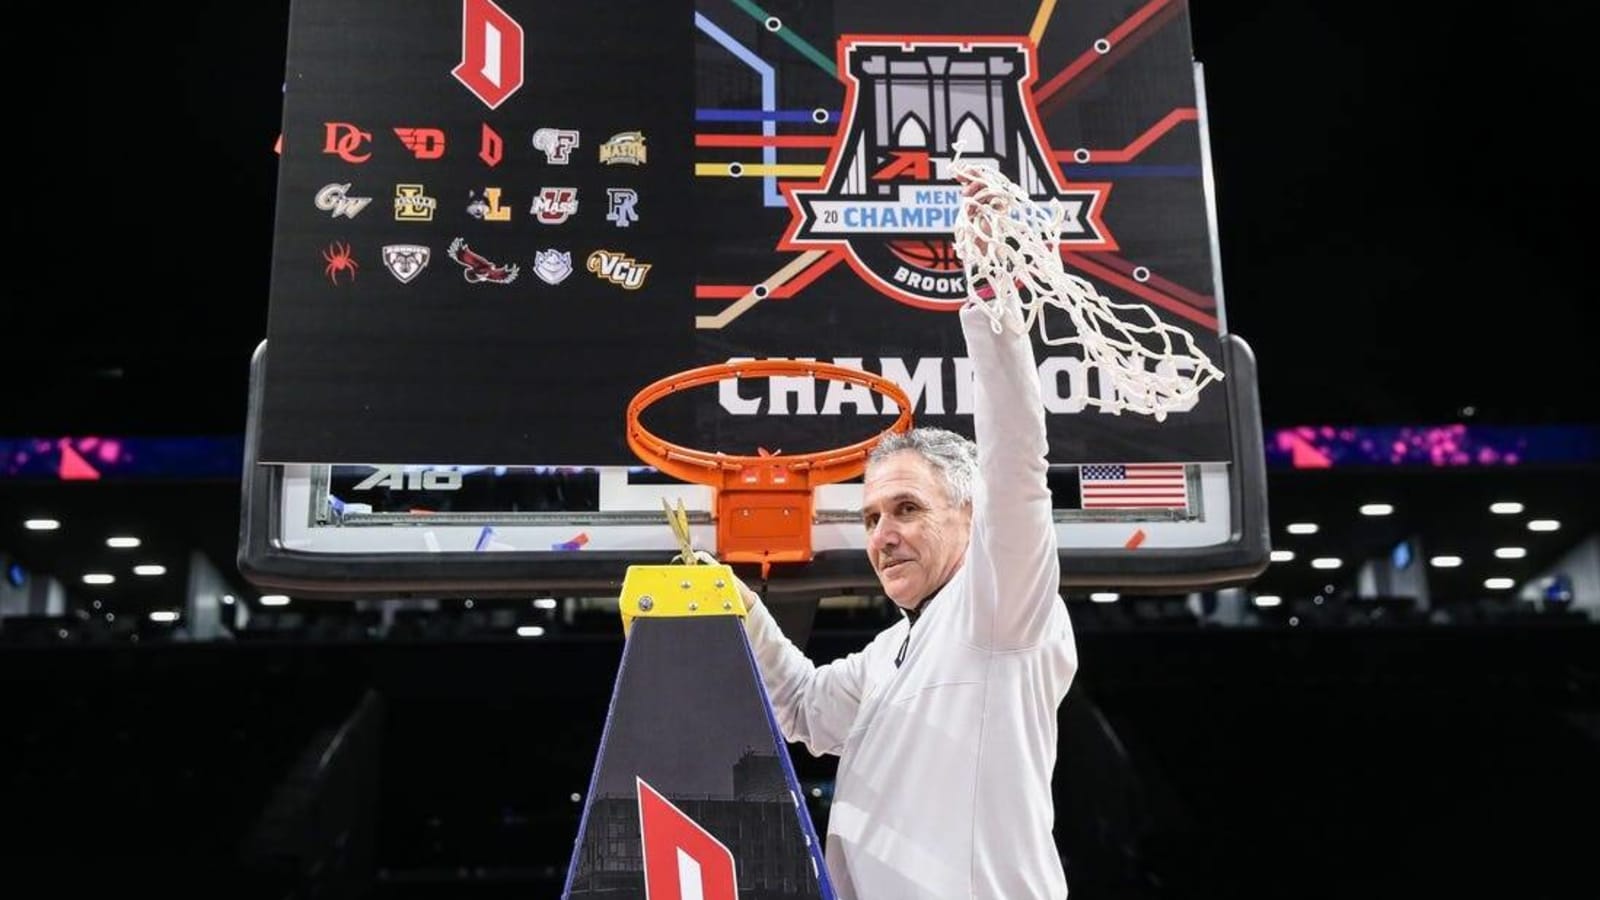 Duquesne coach Keith Dambrot retiring after NCAA tourney